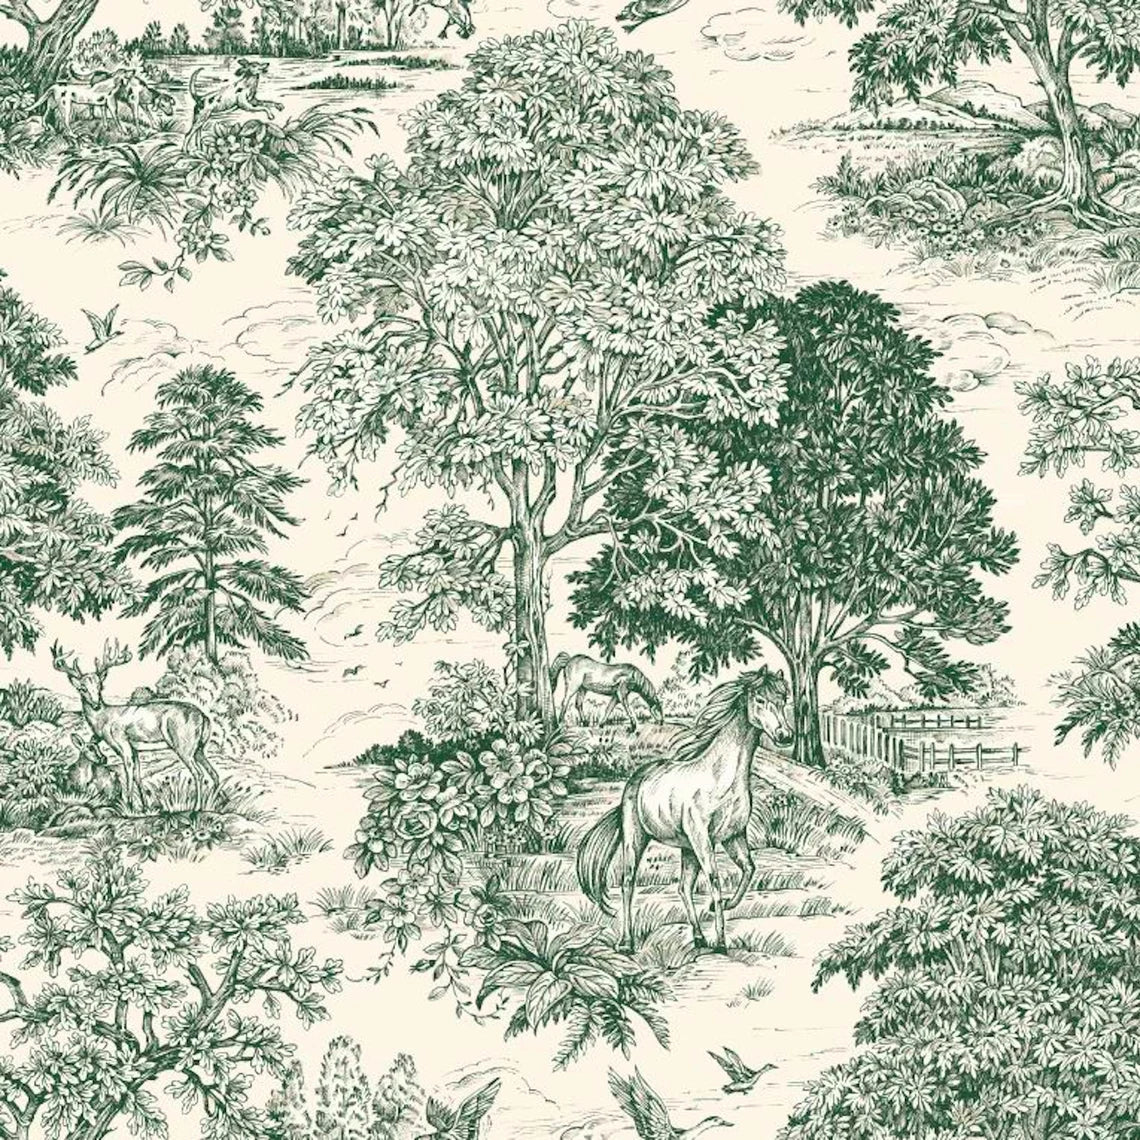 scallop valance in Yellowstone Classic Green Country Toile- Horses, Deer, Dogs- Large Scale